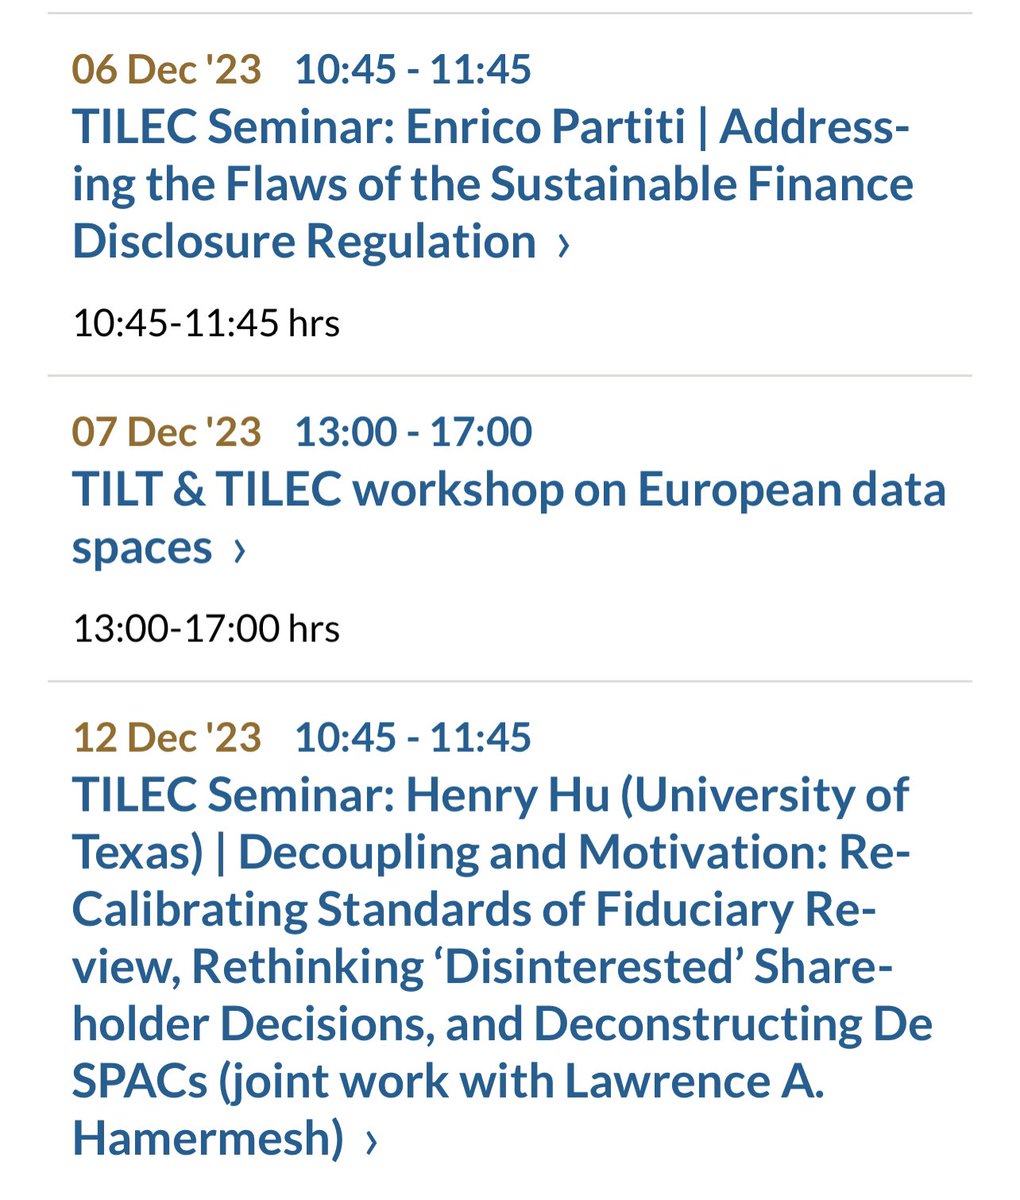 At TILEC, we have an exciting series of events coming up in the next two months. Check it out and join us in person or online! tilburguniversity.edu/research/insti…